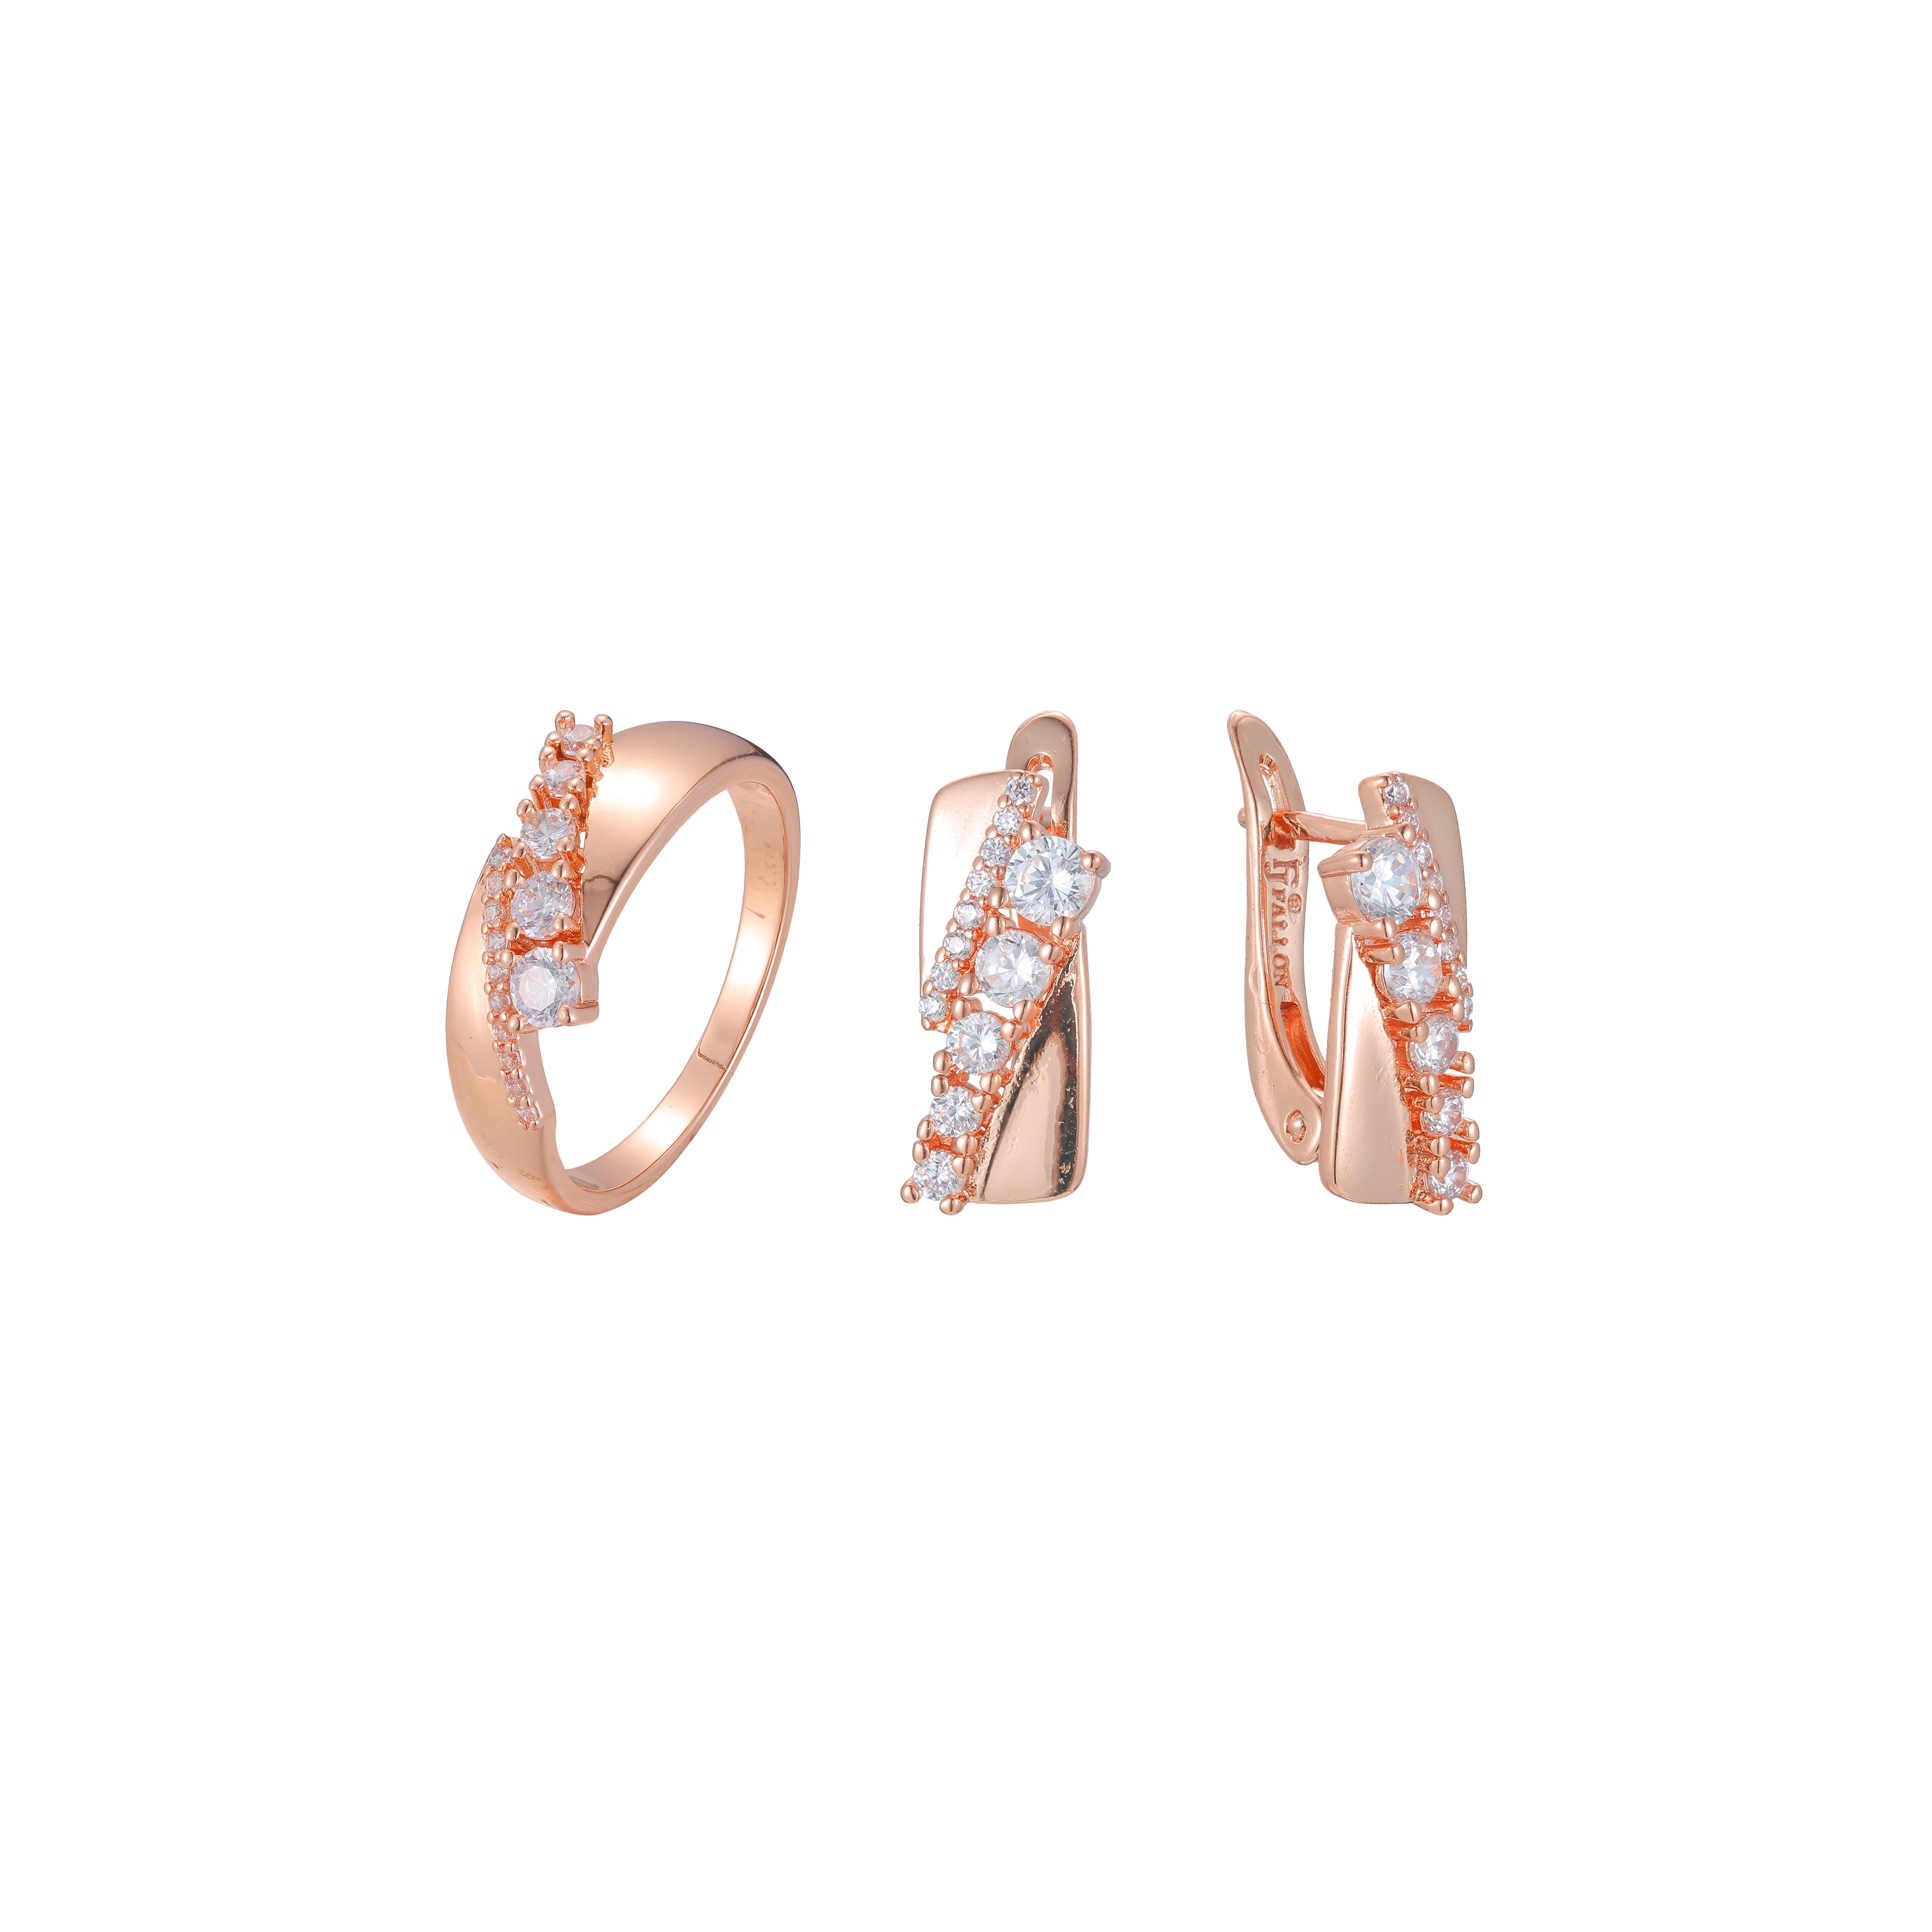 Cluster rings jewelry set plated in Rose Gold colors